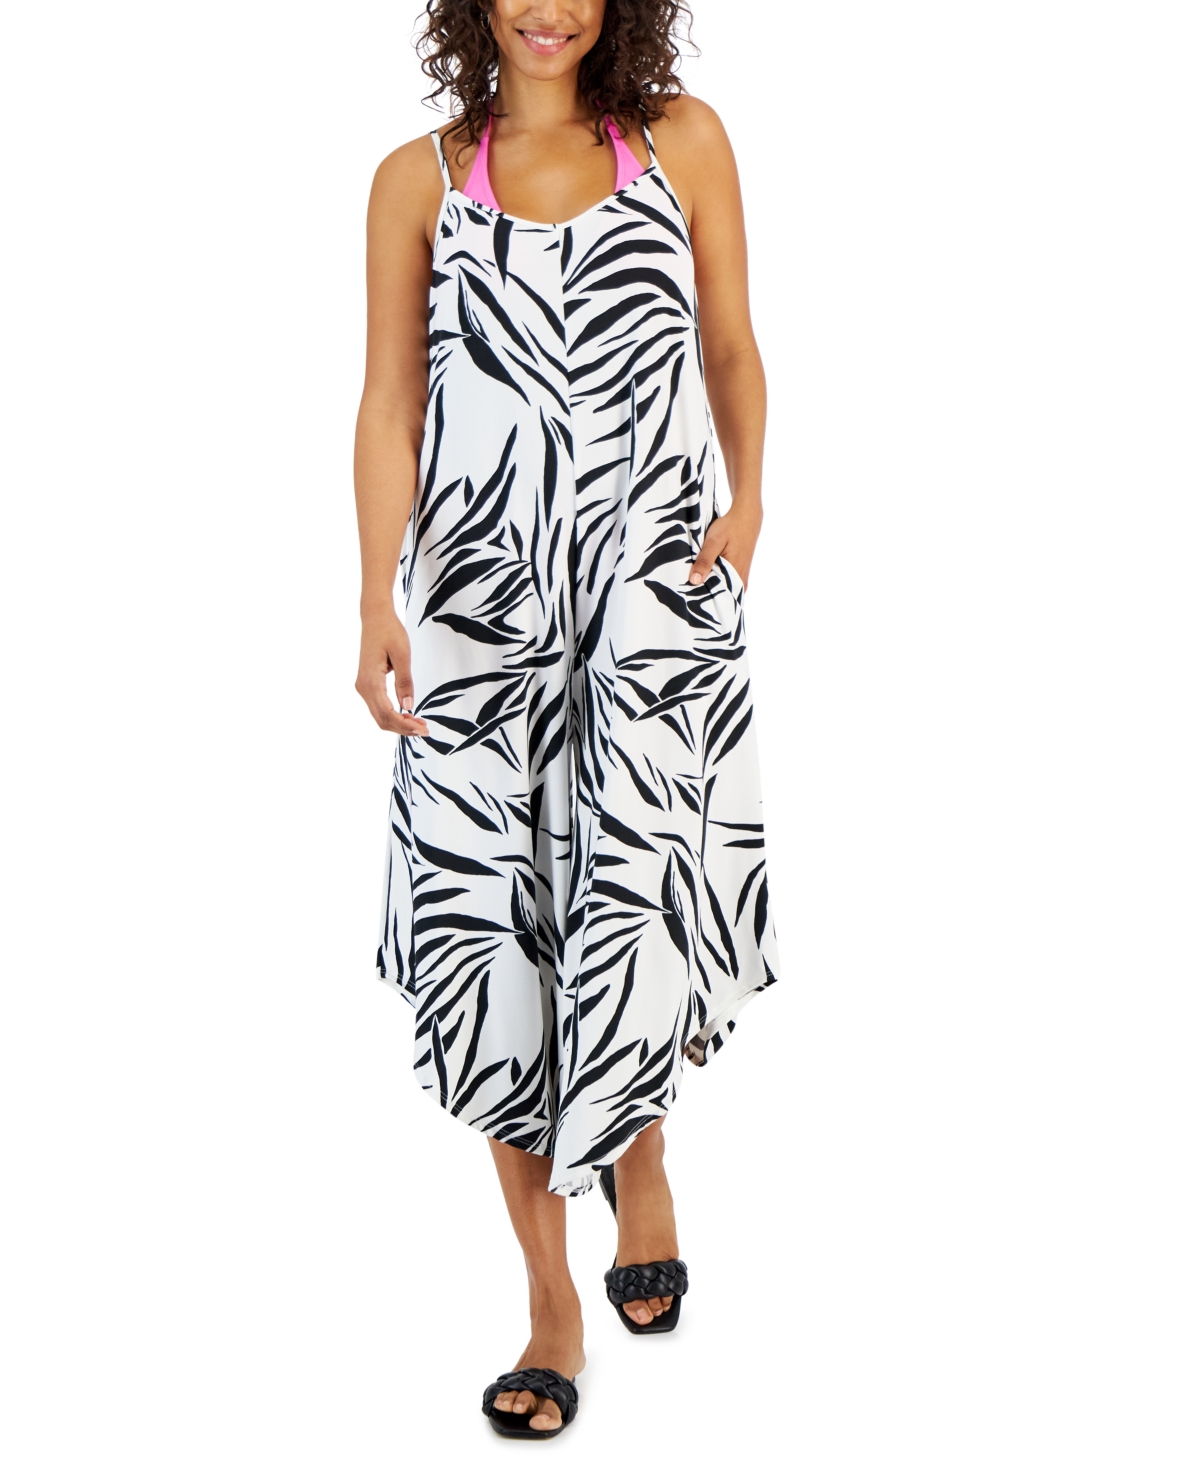 Women's Flowy Printed Cover-Up Jumper - White/black